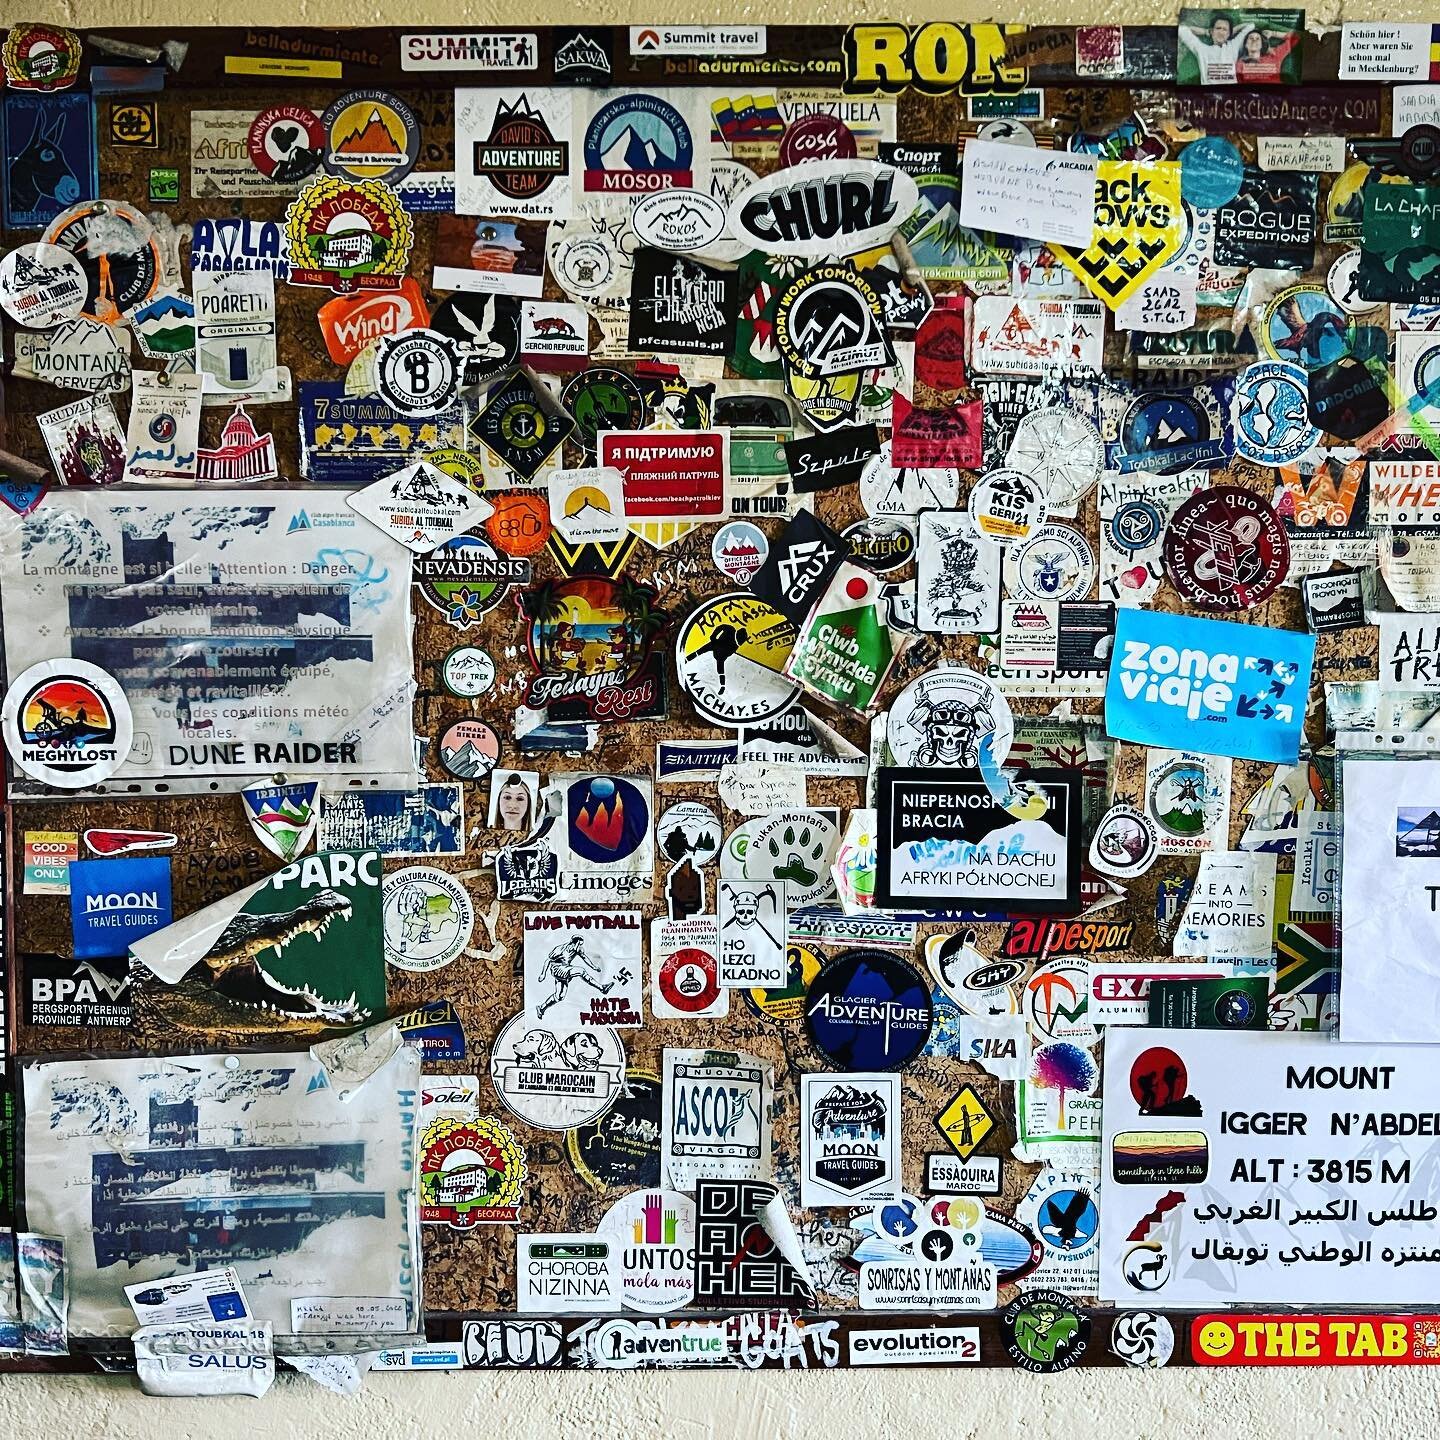 Can you spot the 2 @moonguides stickers???

While I am hanging out at the Toubkal Refuge, I thought I would add to their sticker board.